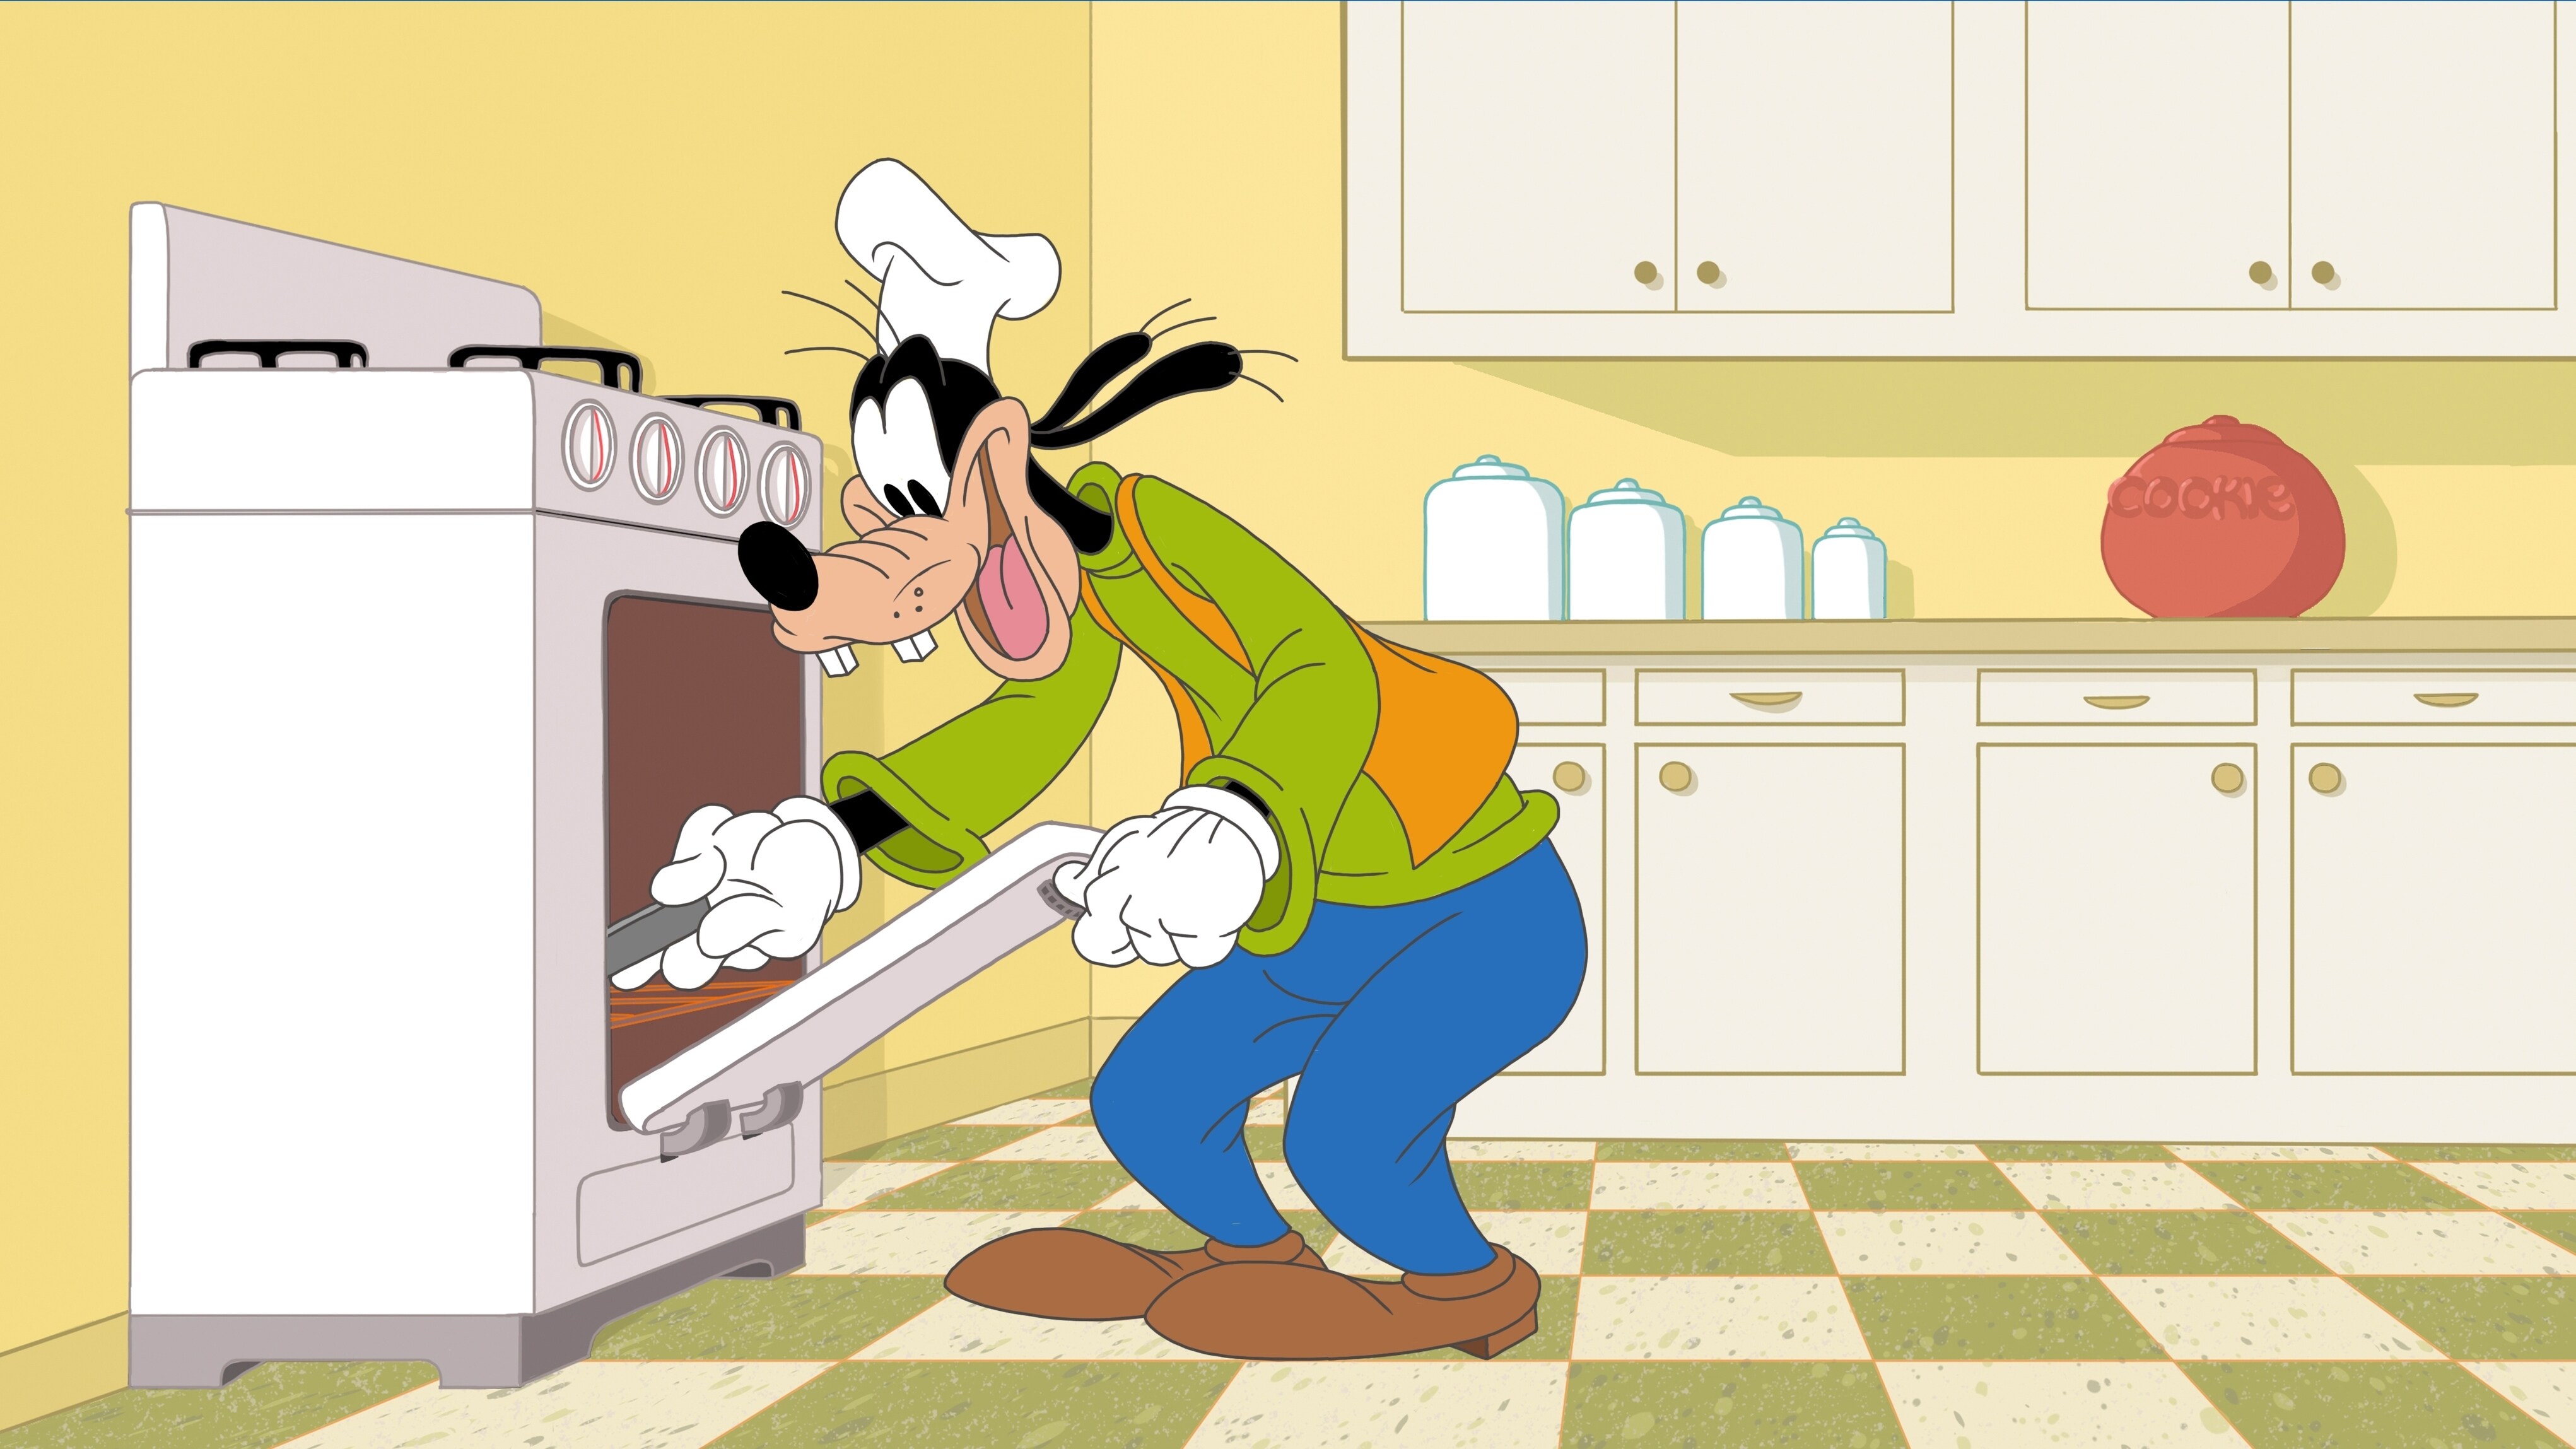 LEARNING TO COOK - It’s a recipe for comedy and disaster when Goofy uses his time at home to learn how to cook. Goofy stars in a trio of hilarious new shorts offering tips on “How to Stay at Home.” © 2021 Disney. All Rights Reserved.